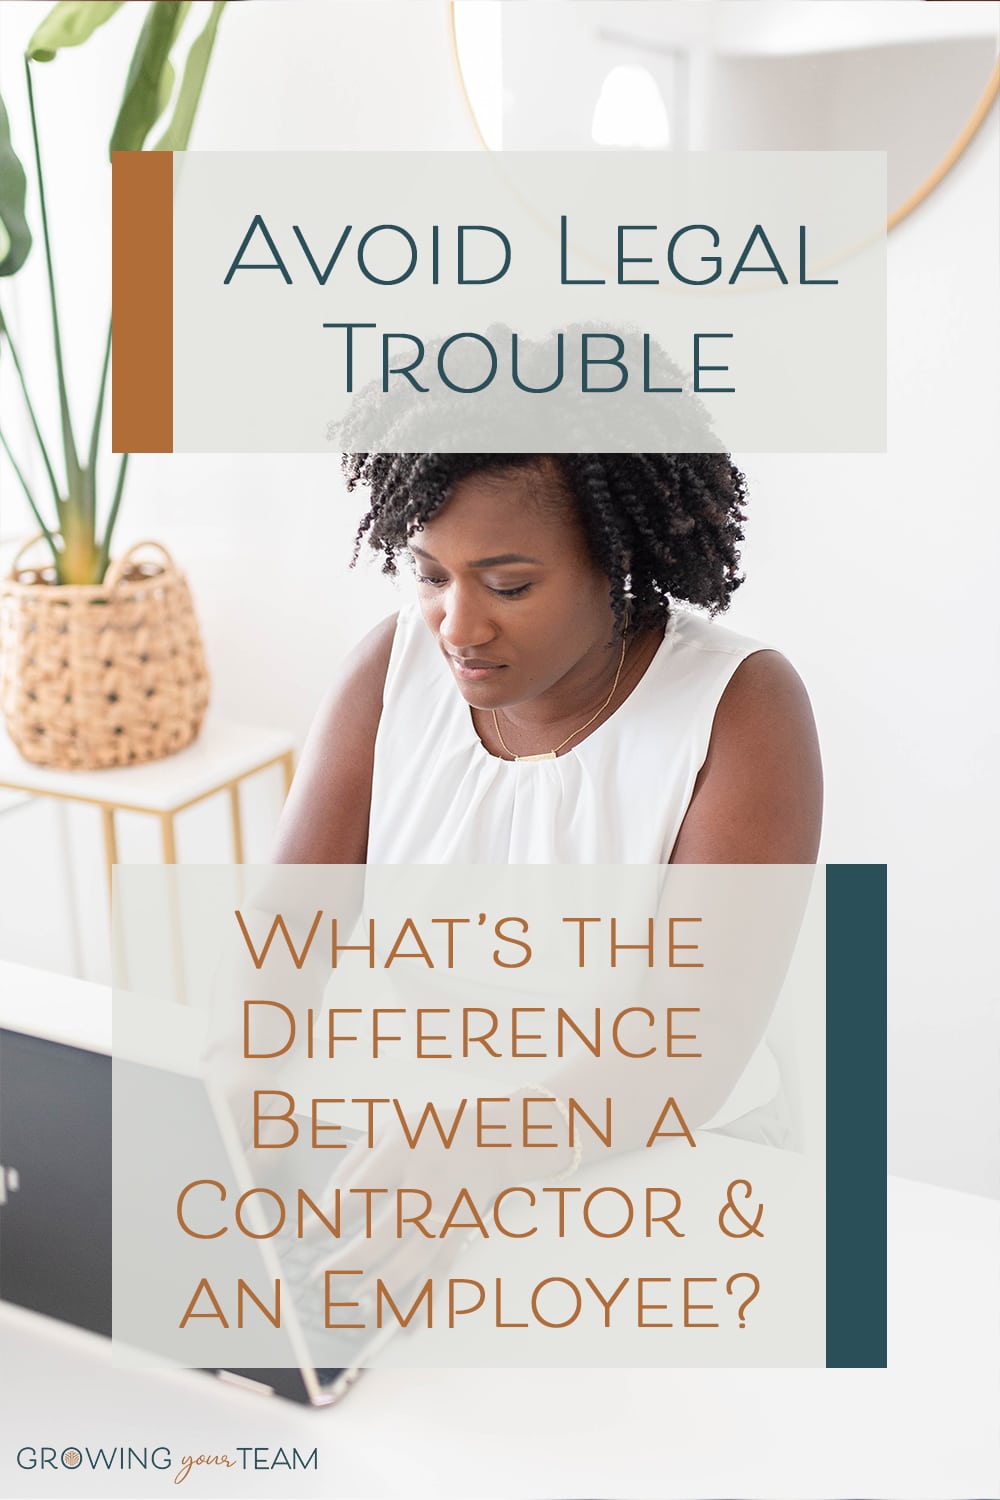 Avoid Legal Trouble What's the Difference Between a Contractor and an Employee, Growing Your Team, Jamie Van Cuyk, Small Business hiring consulting